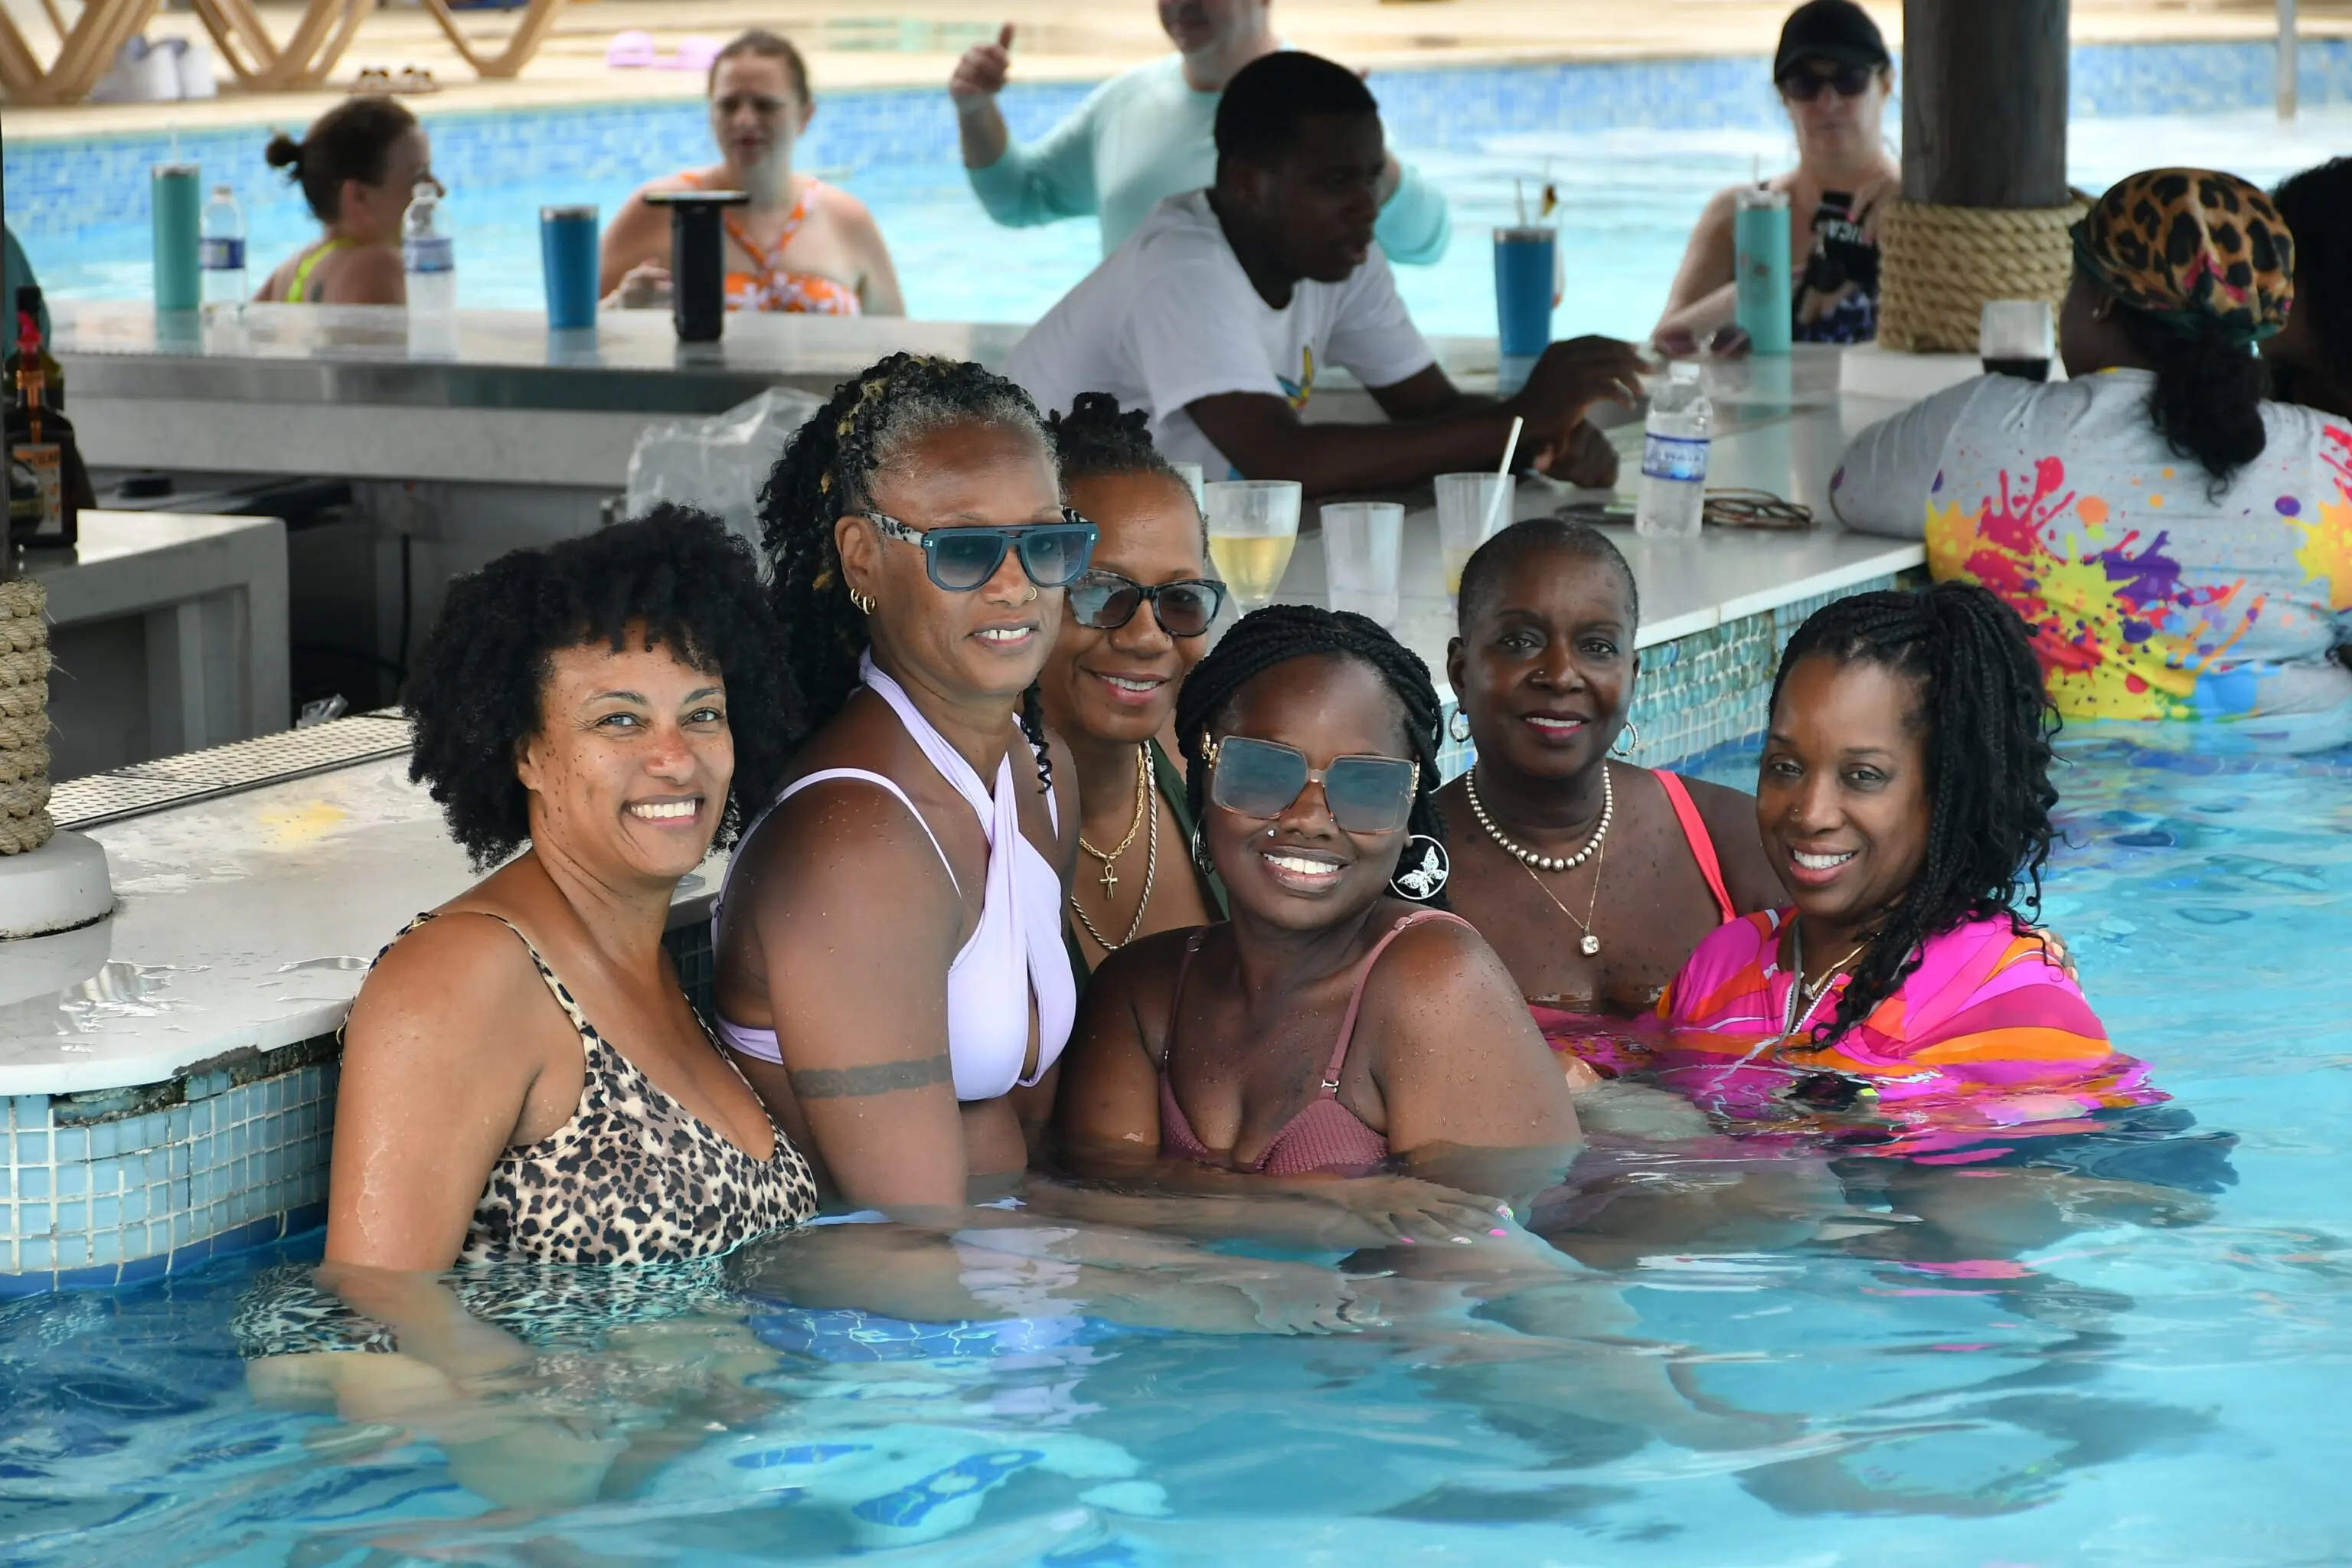 A group of women in the pool at a resort.